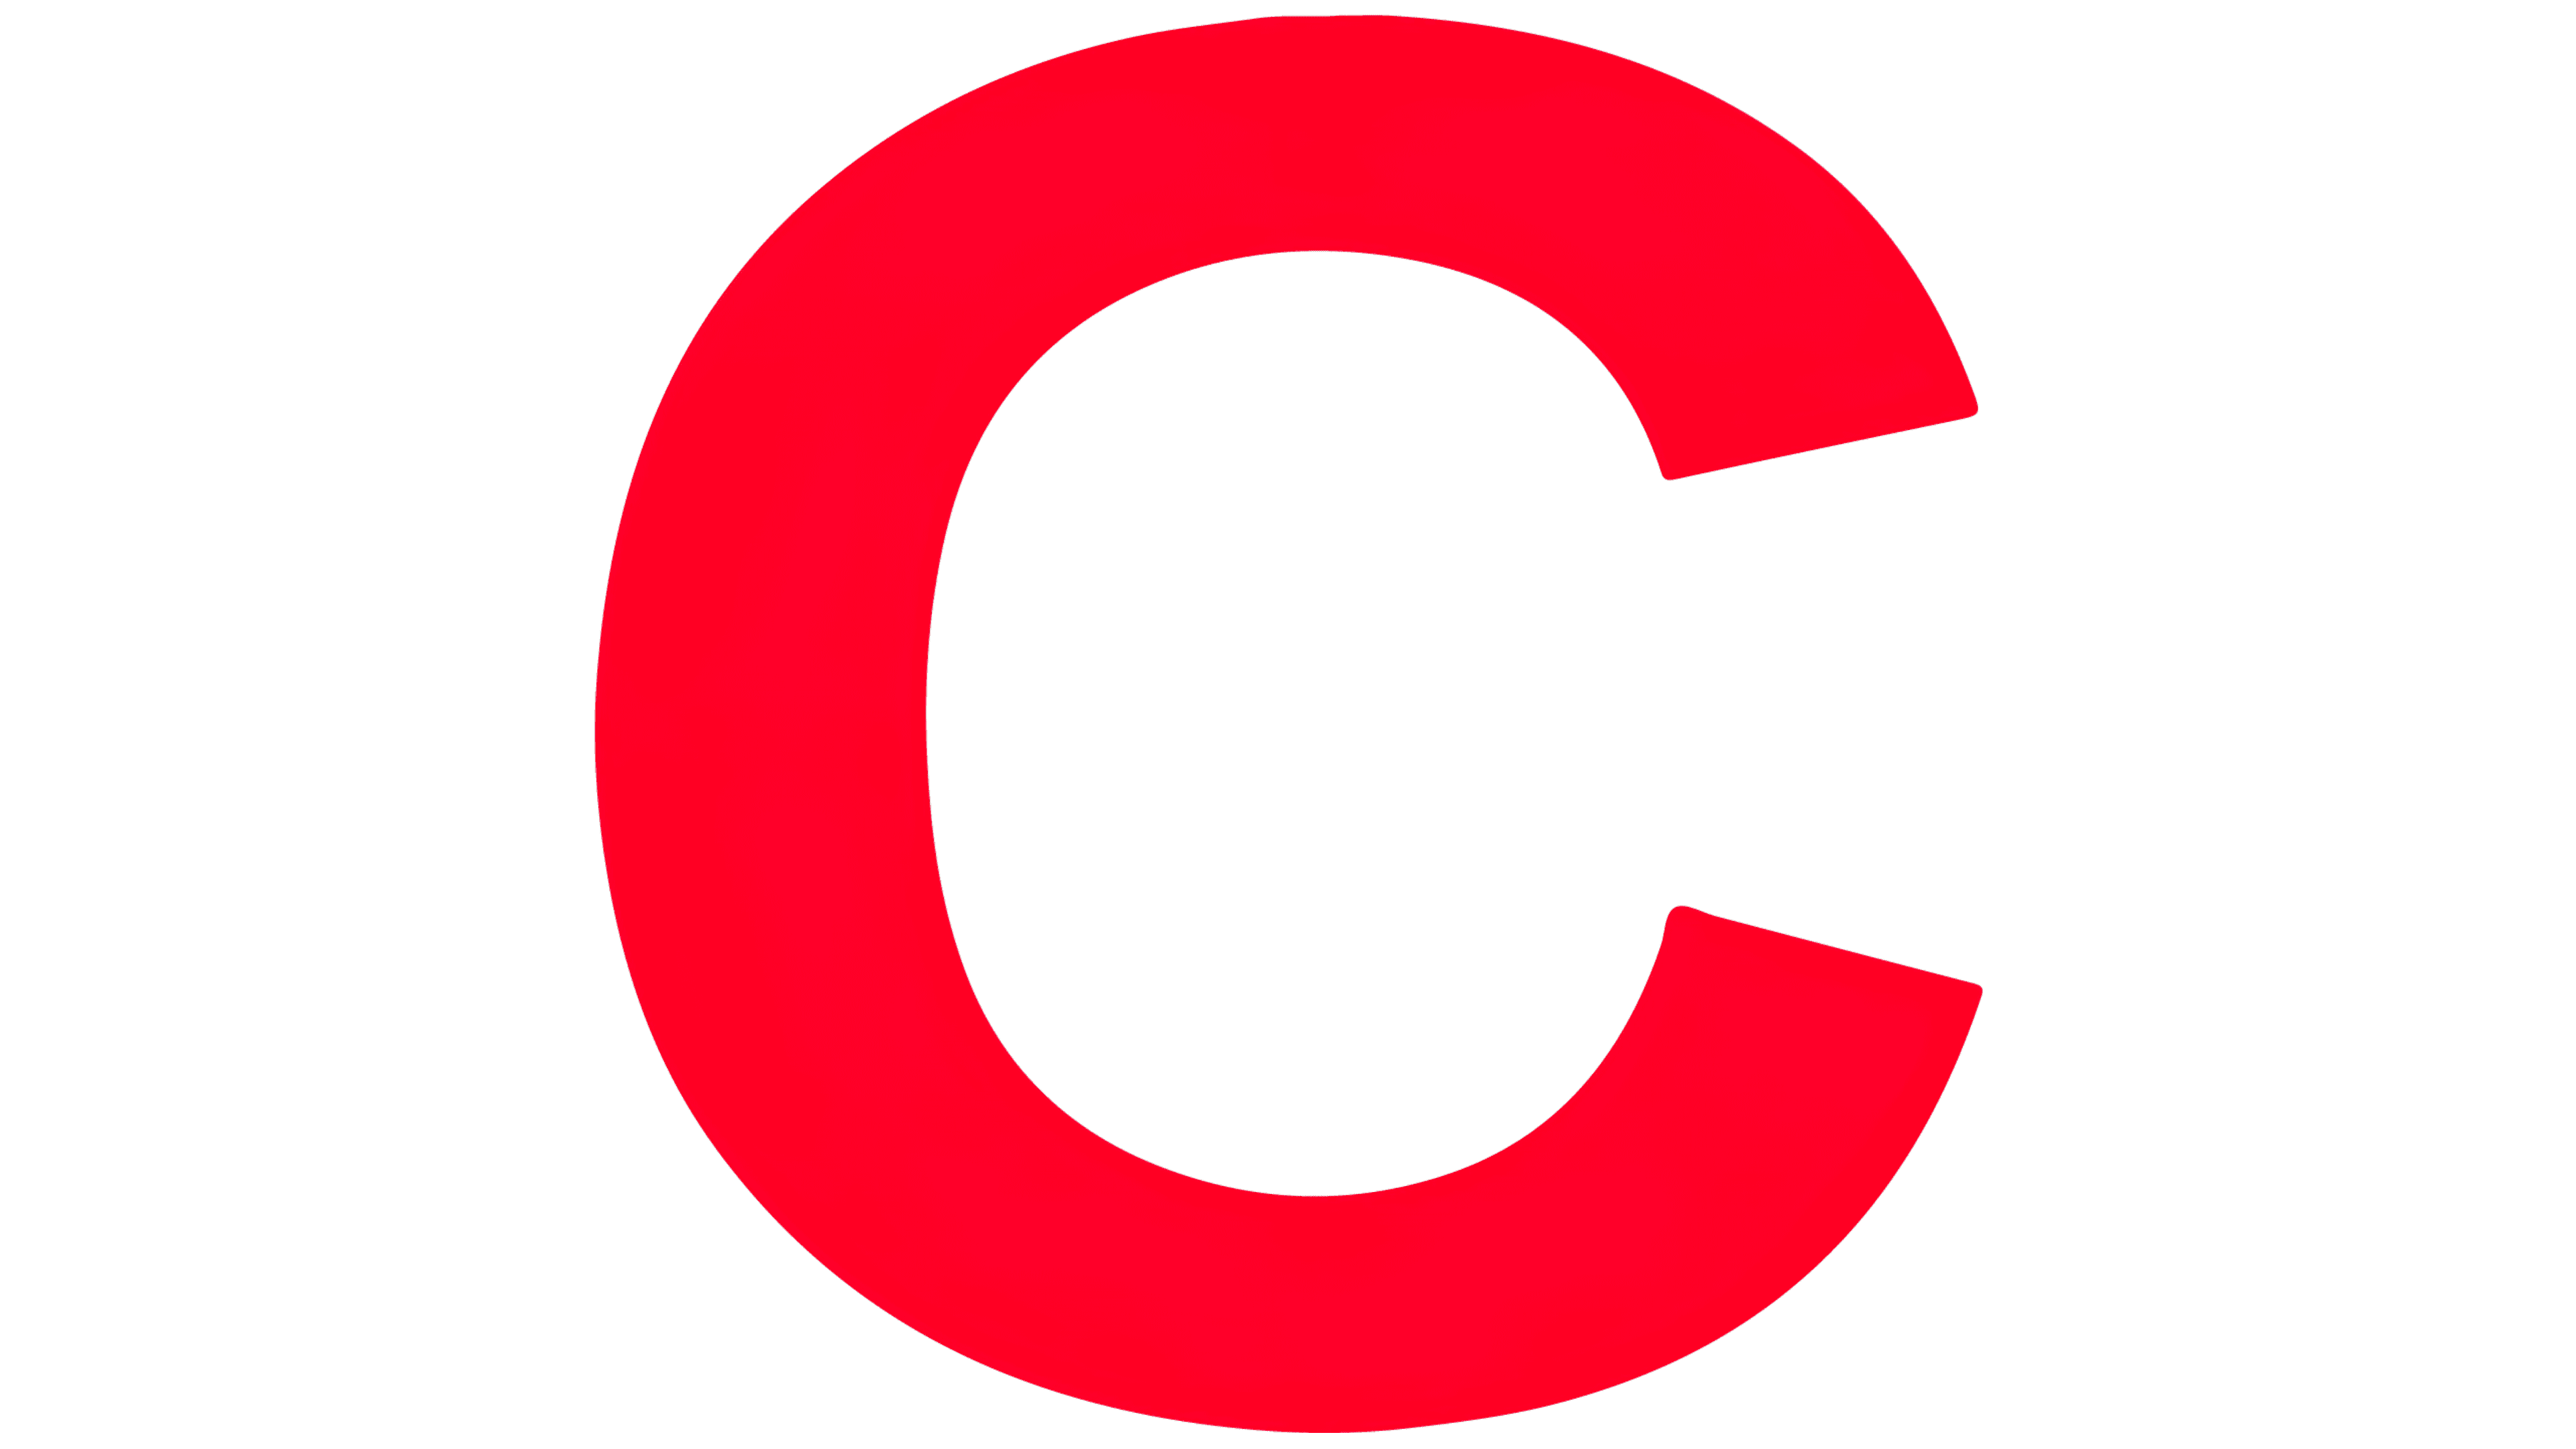 Cincinnati Reds logo and symbol, meaning, history, PNG